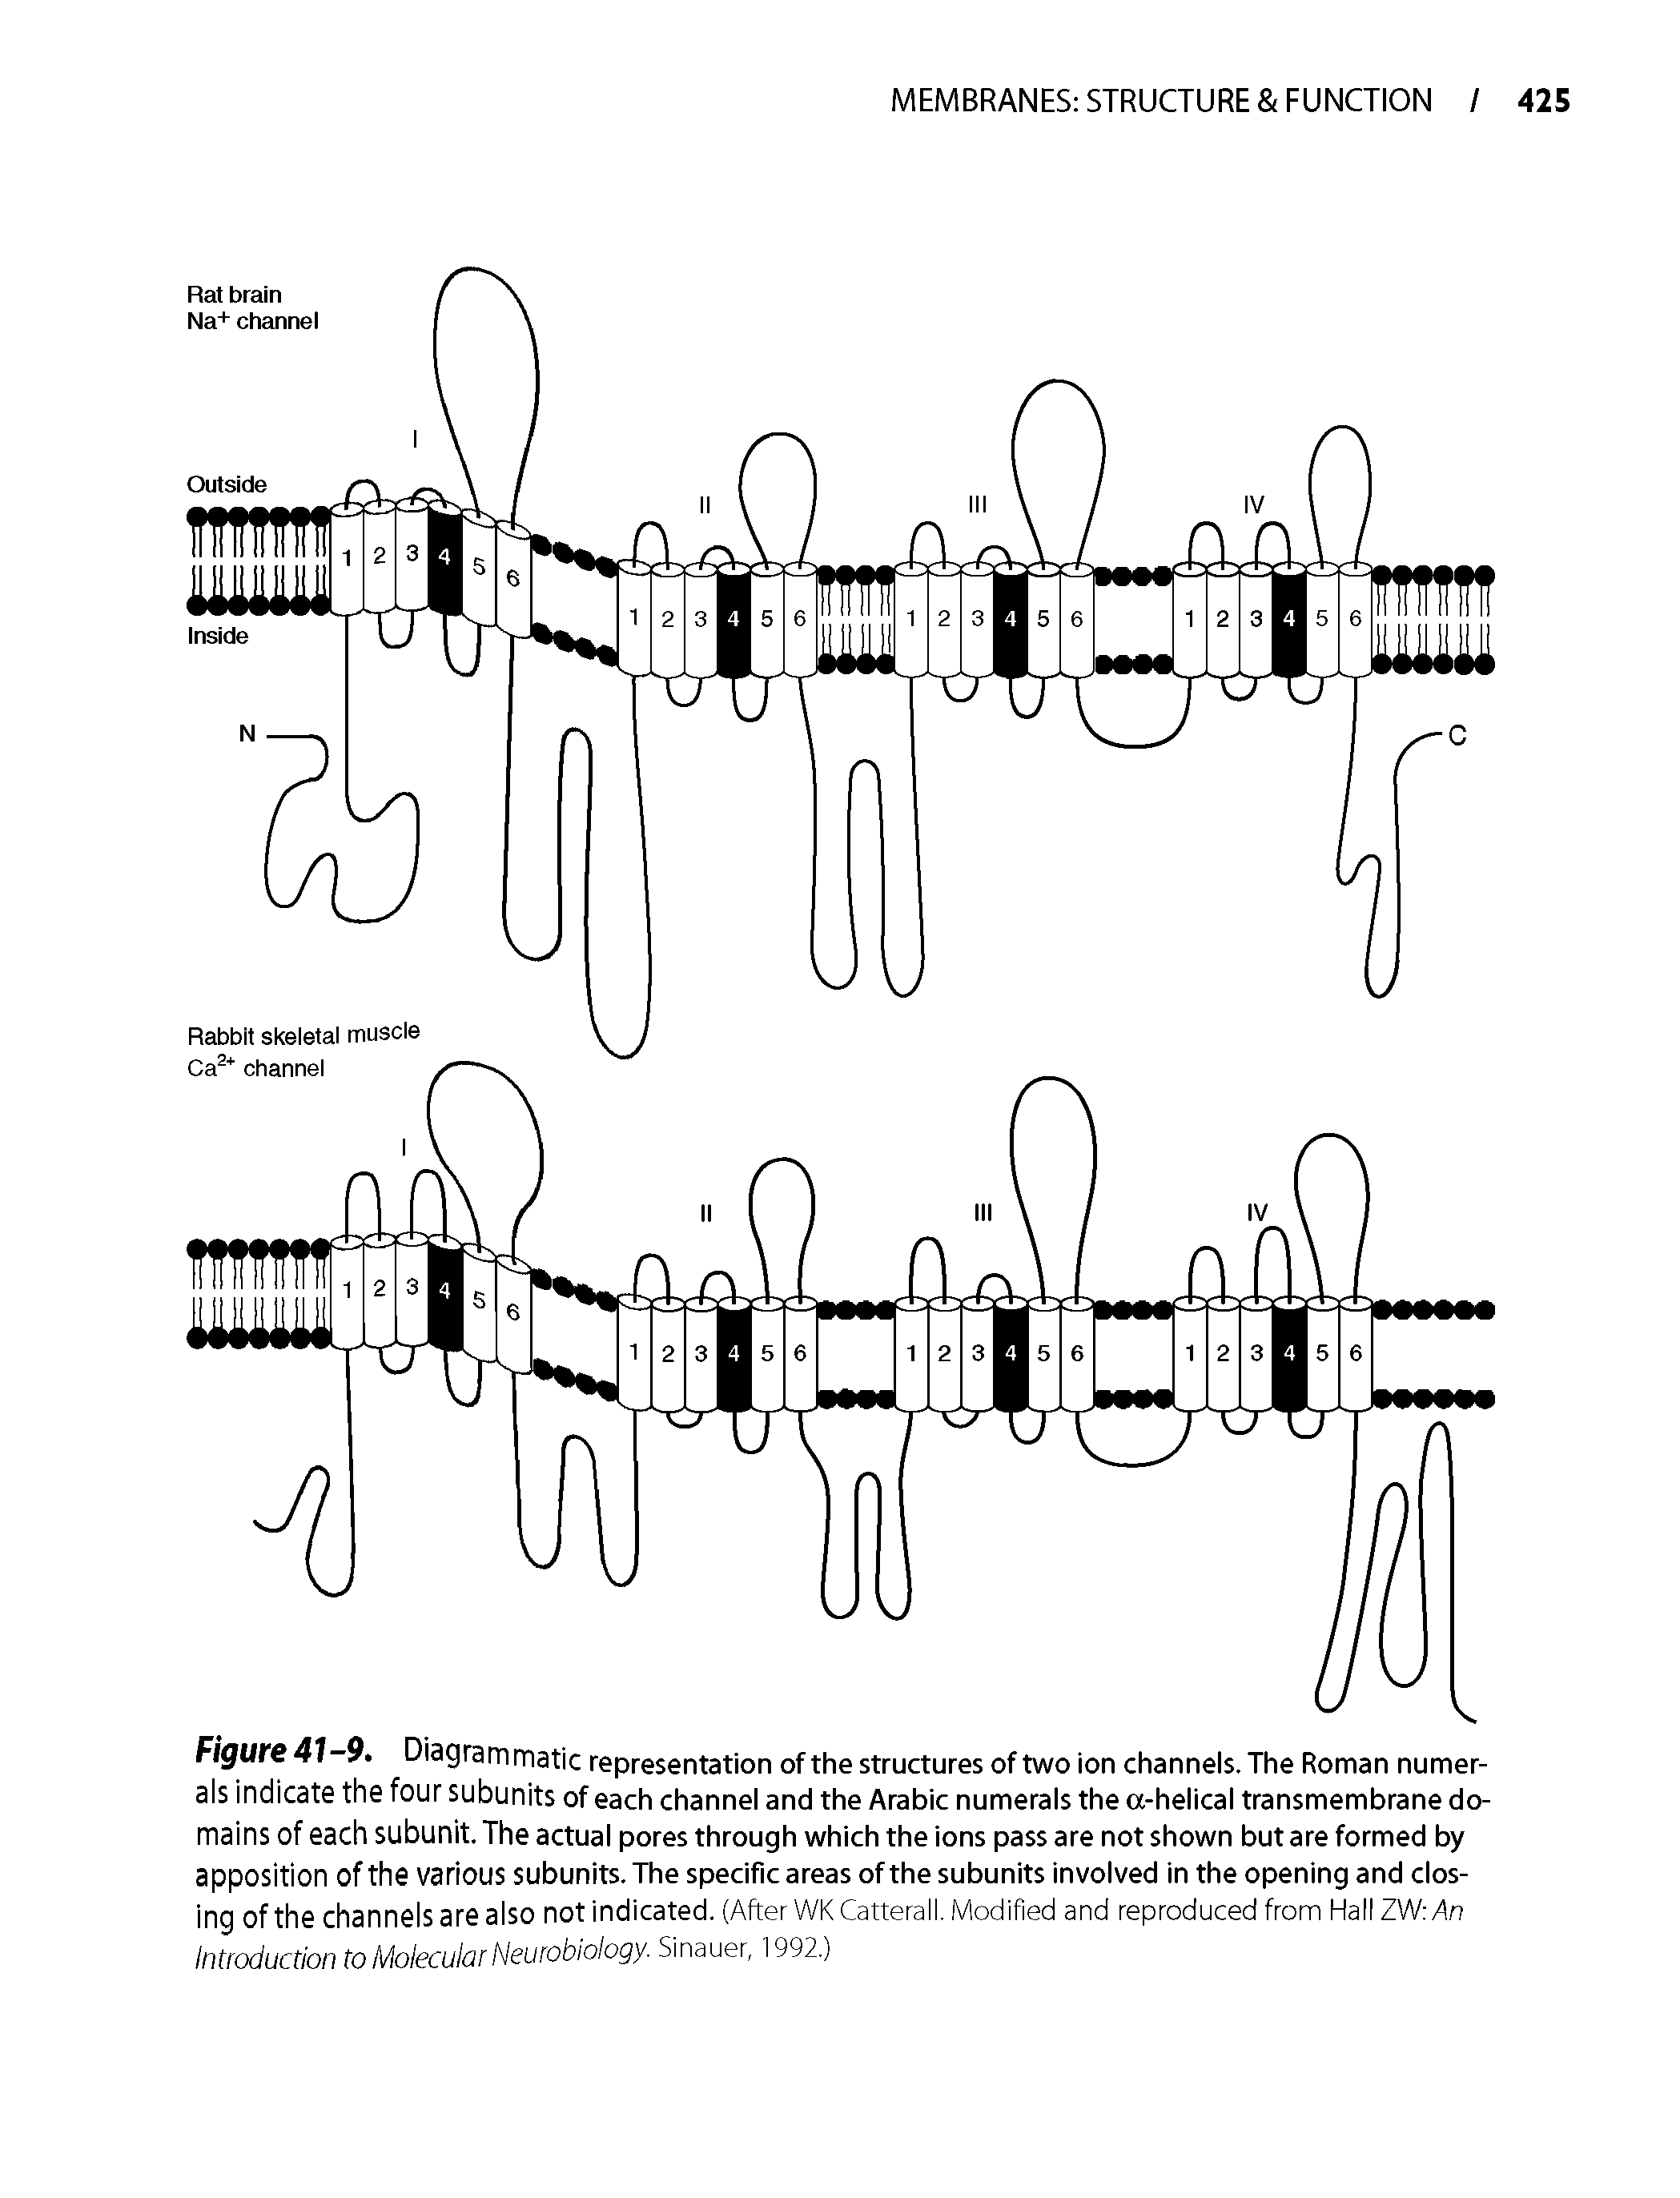 Figure 41-9. Diagrammatic representation of the structures of two ion channels. The Roman numerals indicate the four subunits of each channel and the Arabic numerals the a-helical transmembrane domains of each subunit. The actual pores through which the ions pass are not shown but are formed by apposition of the various subunits. The specific areas of the subunits involved in the opening and closing of the channels are also not indicated. (After WKCatterall. Modified and reproduced from Hall ZW An Introduction to Molecular Neurobiology. Sinauer, 1992.)...